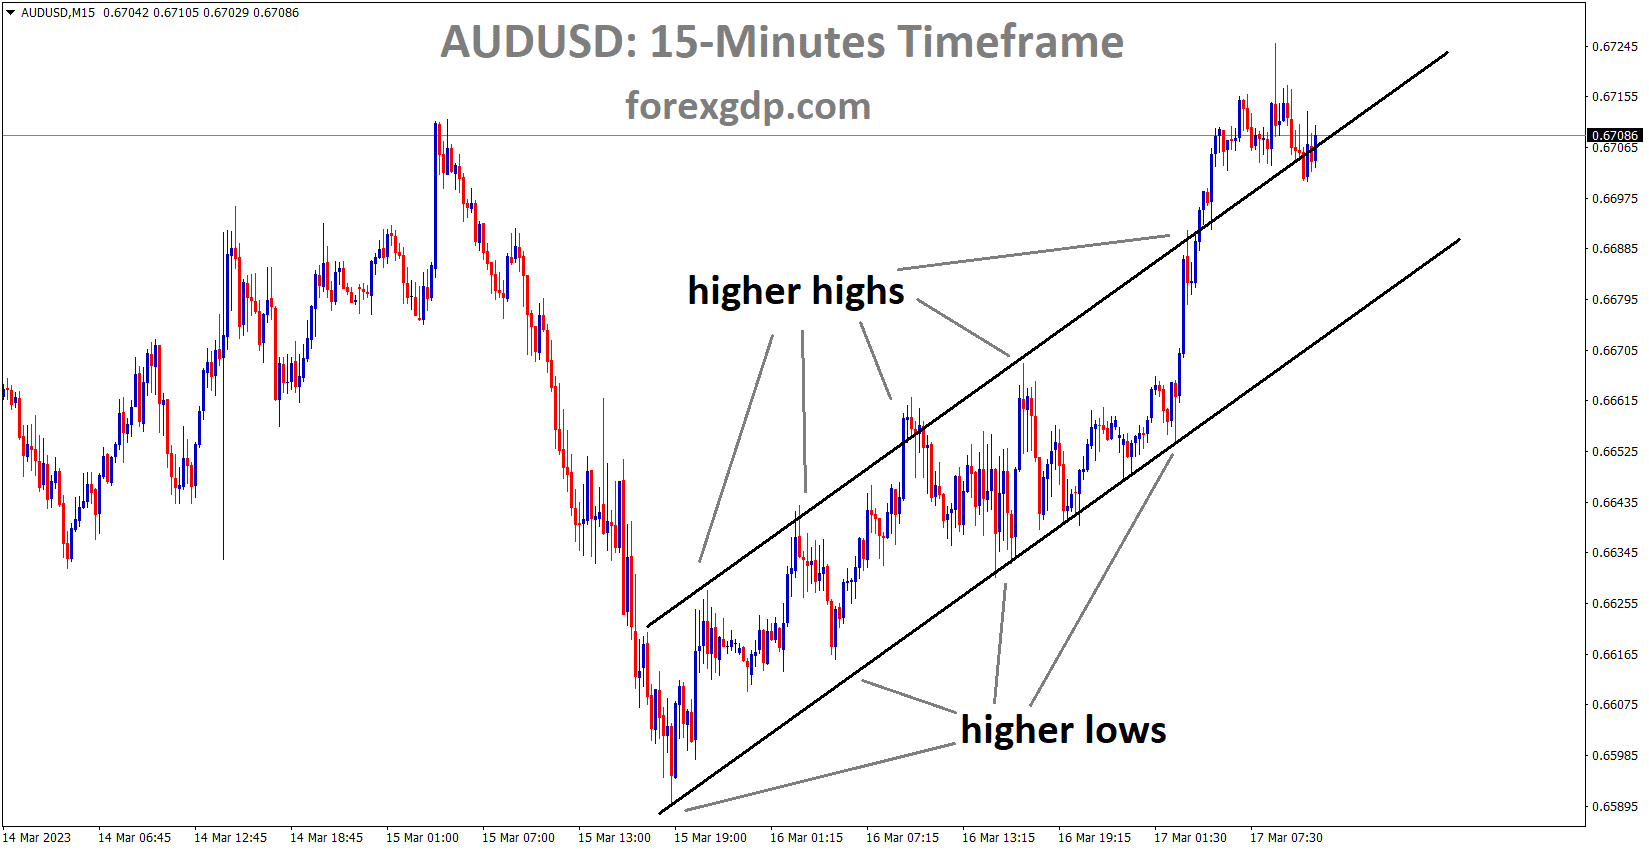 AUDUSD is moving in an Ascending channel and the market has reached the higher high area of the channel